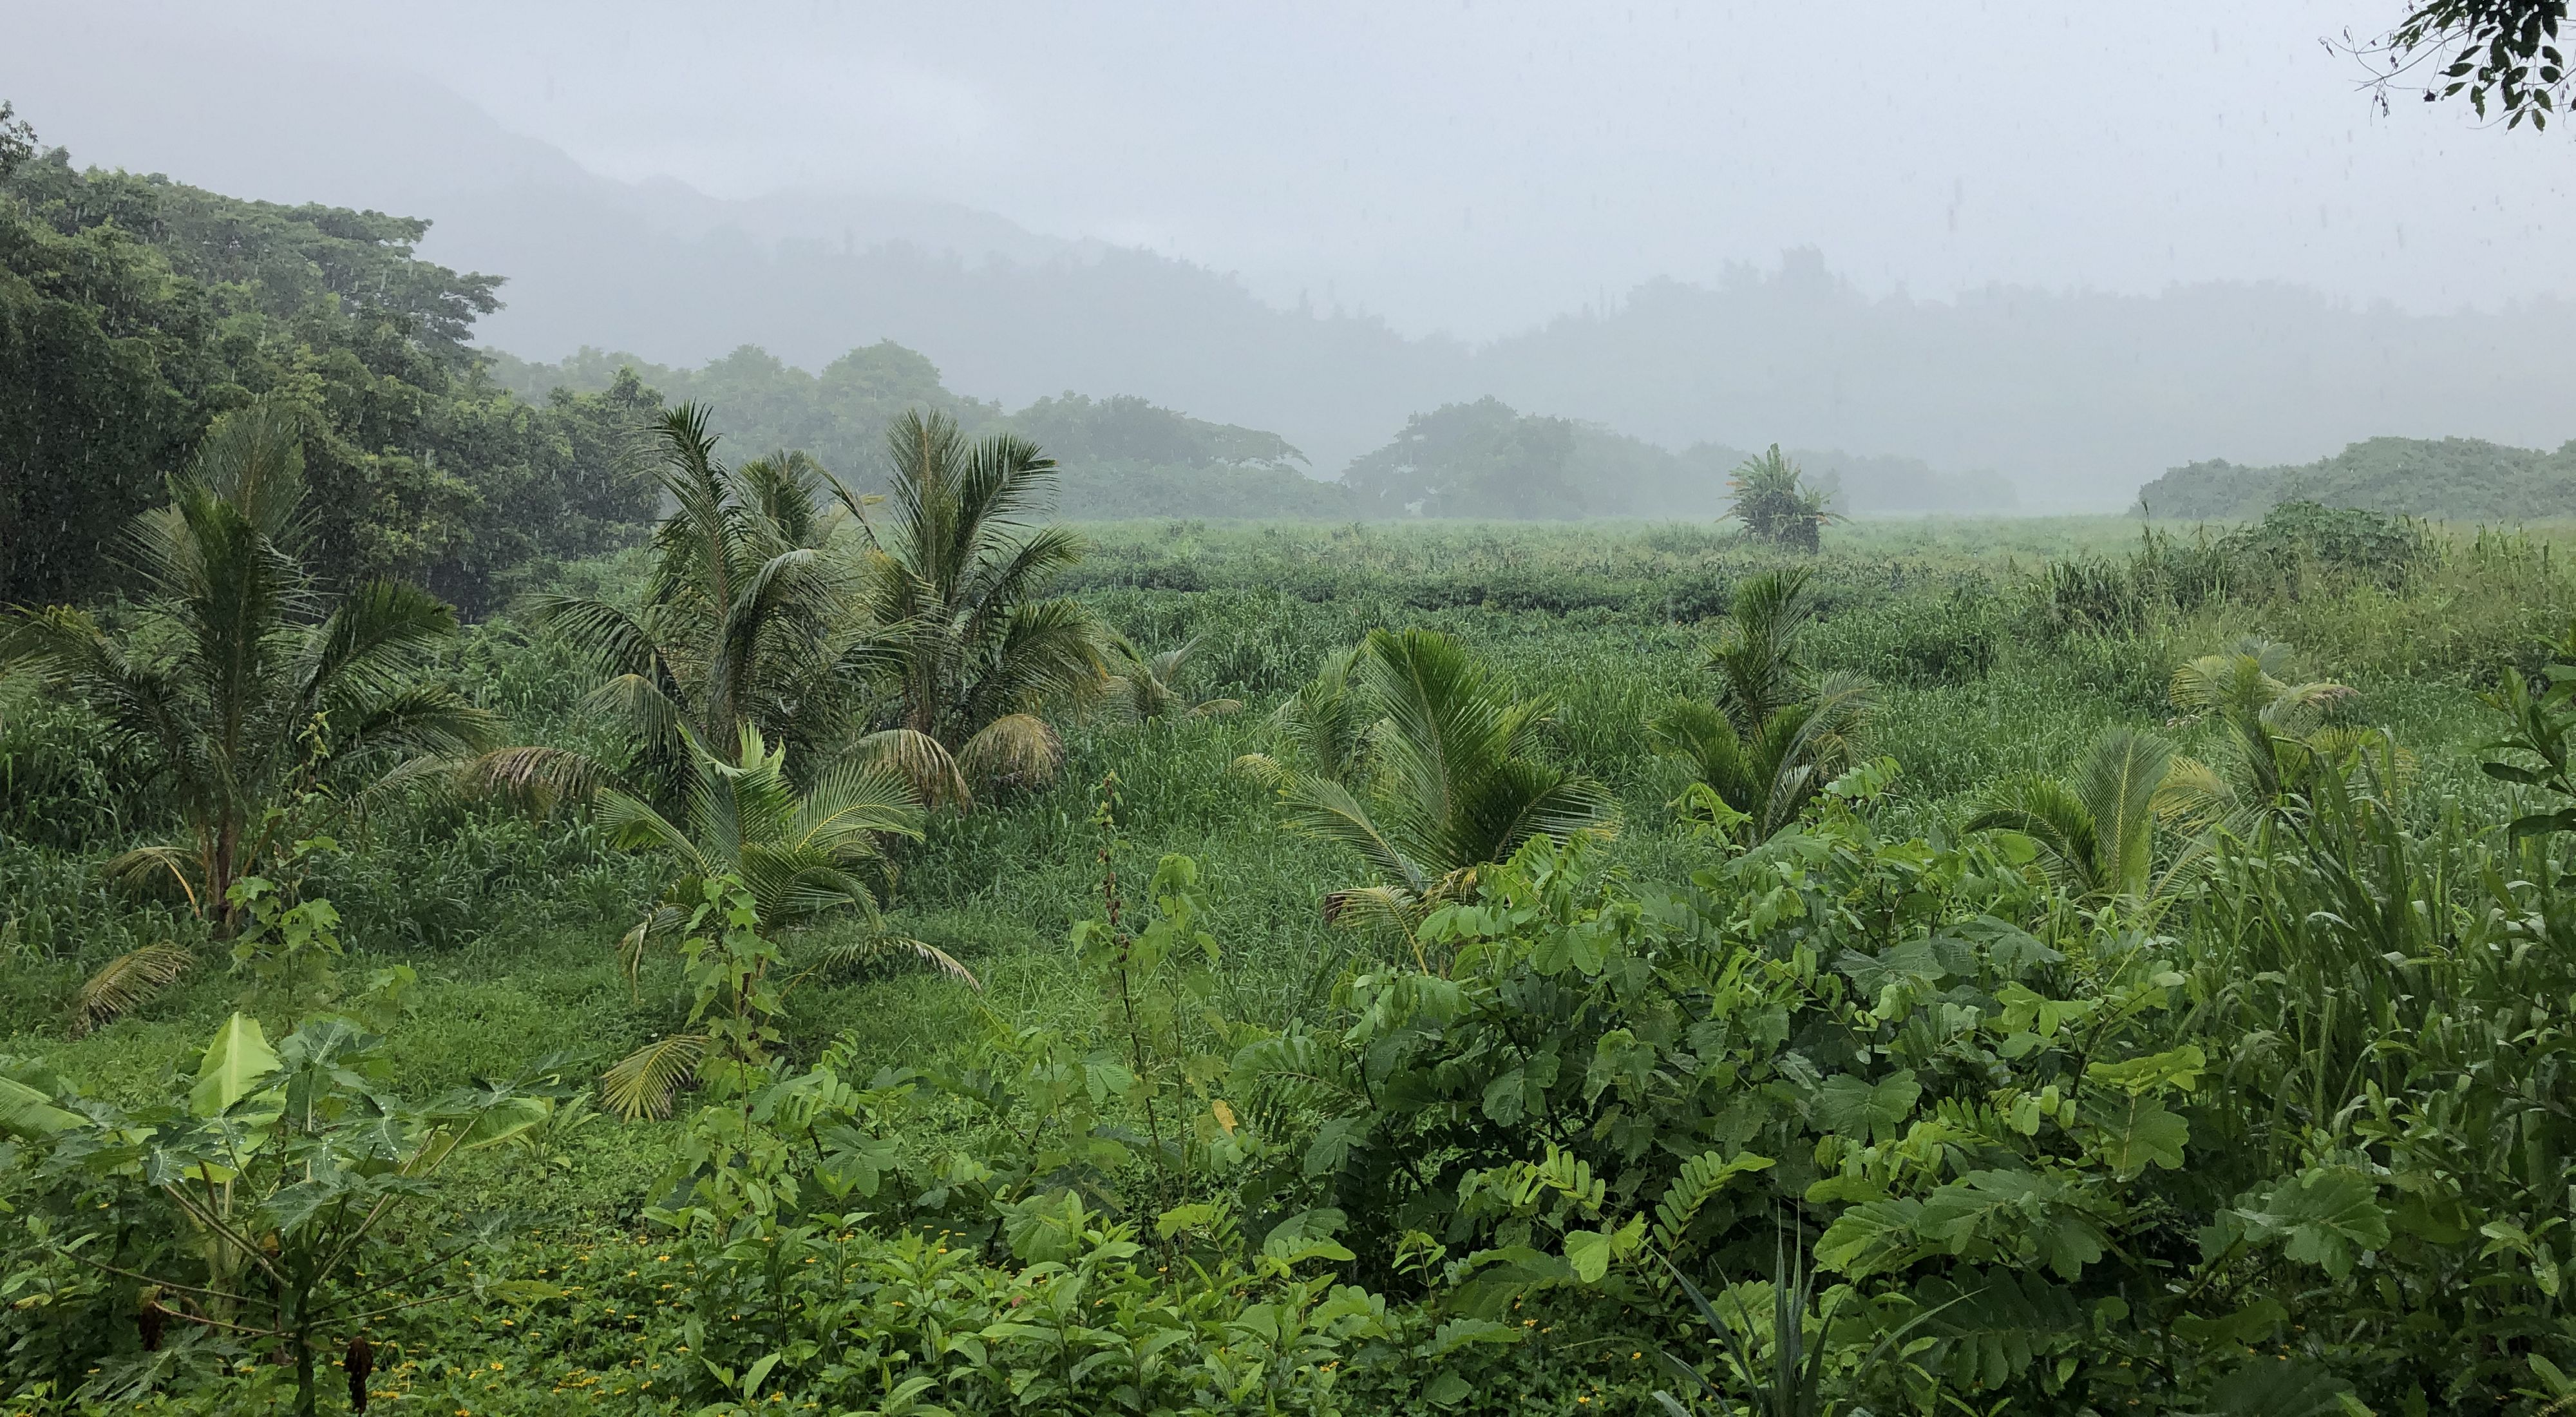 Landscape view of a lush, green field in O'ahu with ferns and palms and trees in the distance and a mist rising over the land.